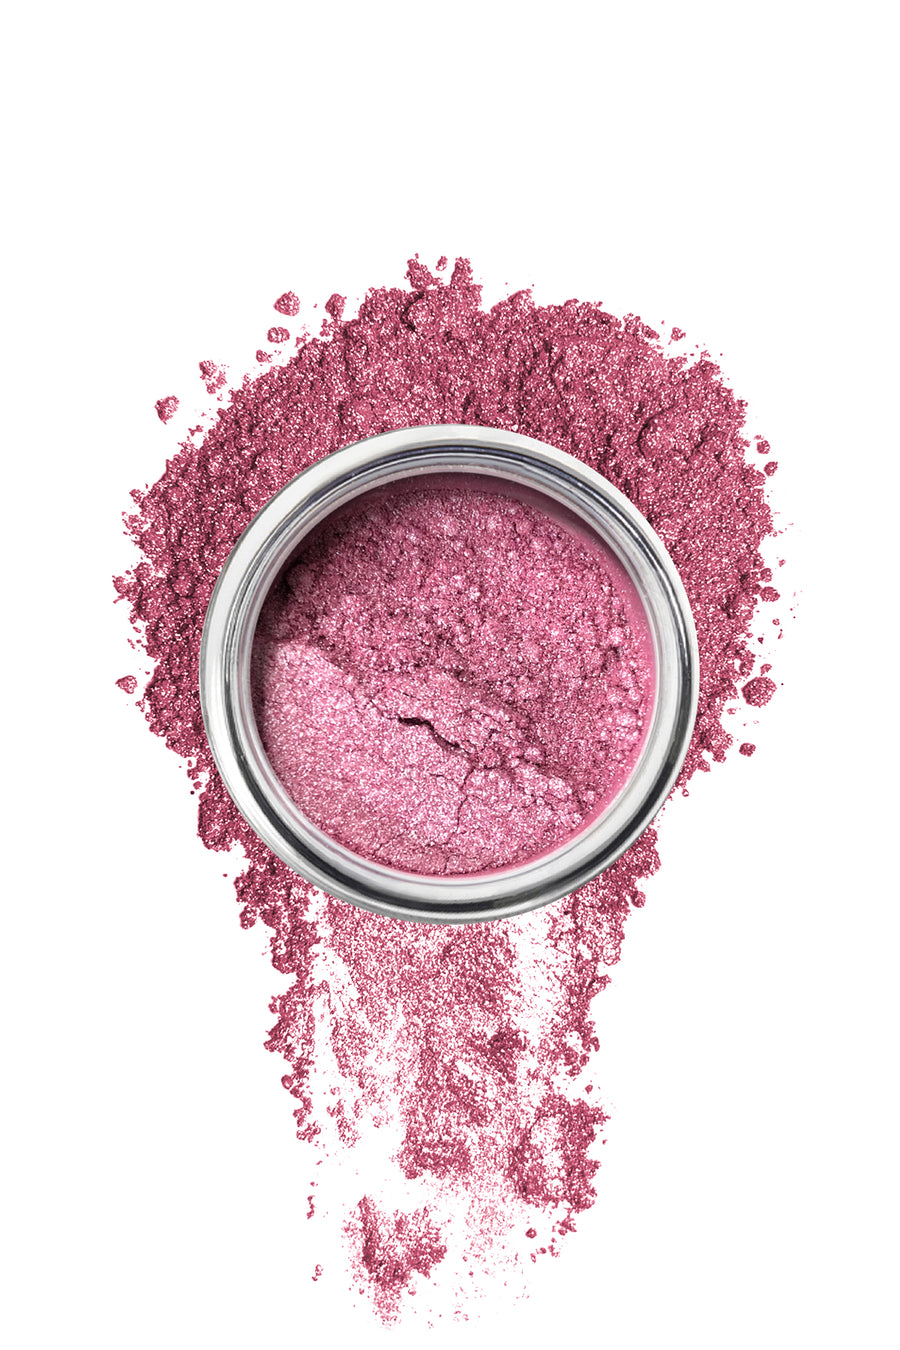 Shimmer Eyeshadow #24 - Soft Pink - Blend Mineral Cosmetics